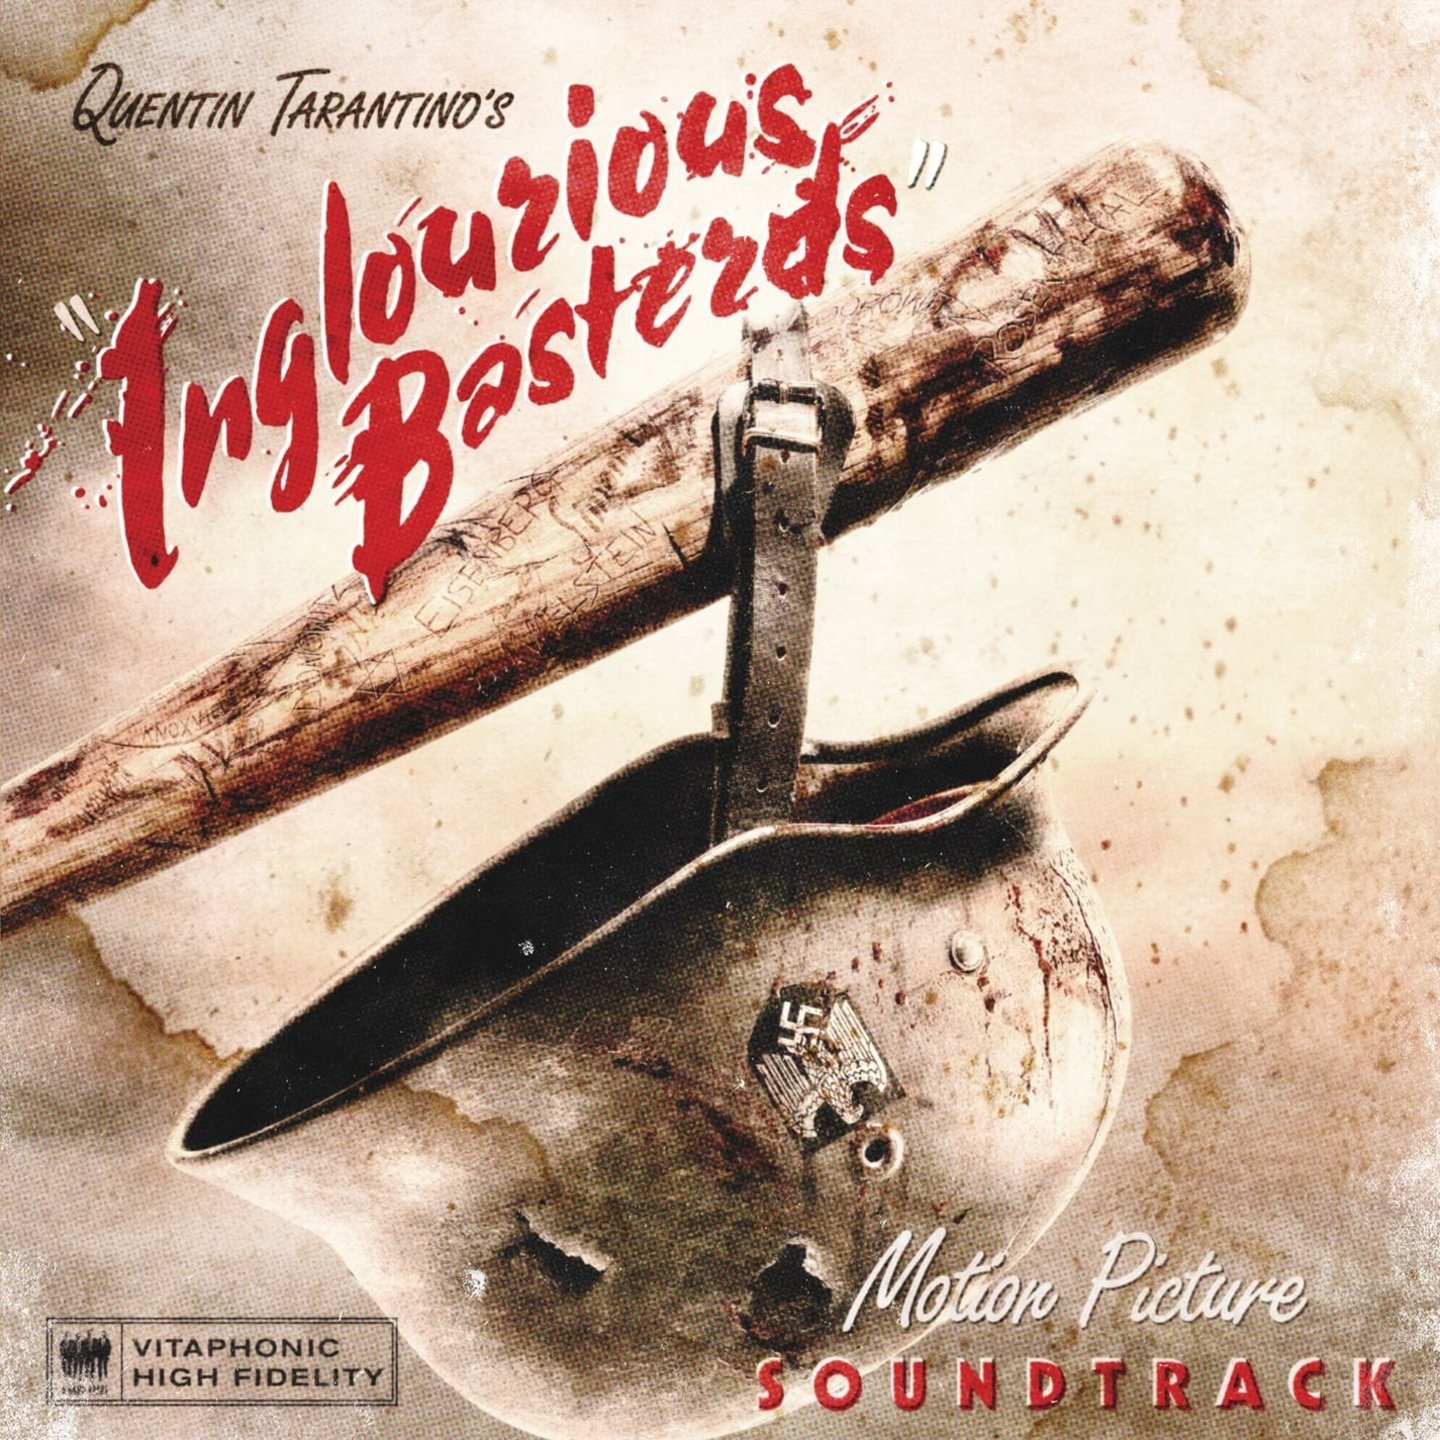 VA - Quentin Tarantinos Inglourious Basterds Motion Picture Soundtrack LP Blood Red Vinyl